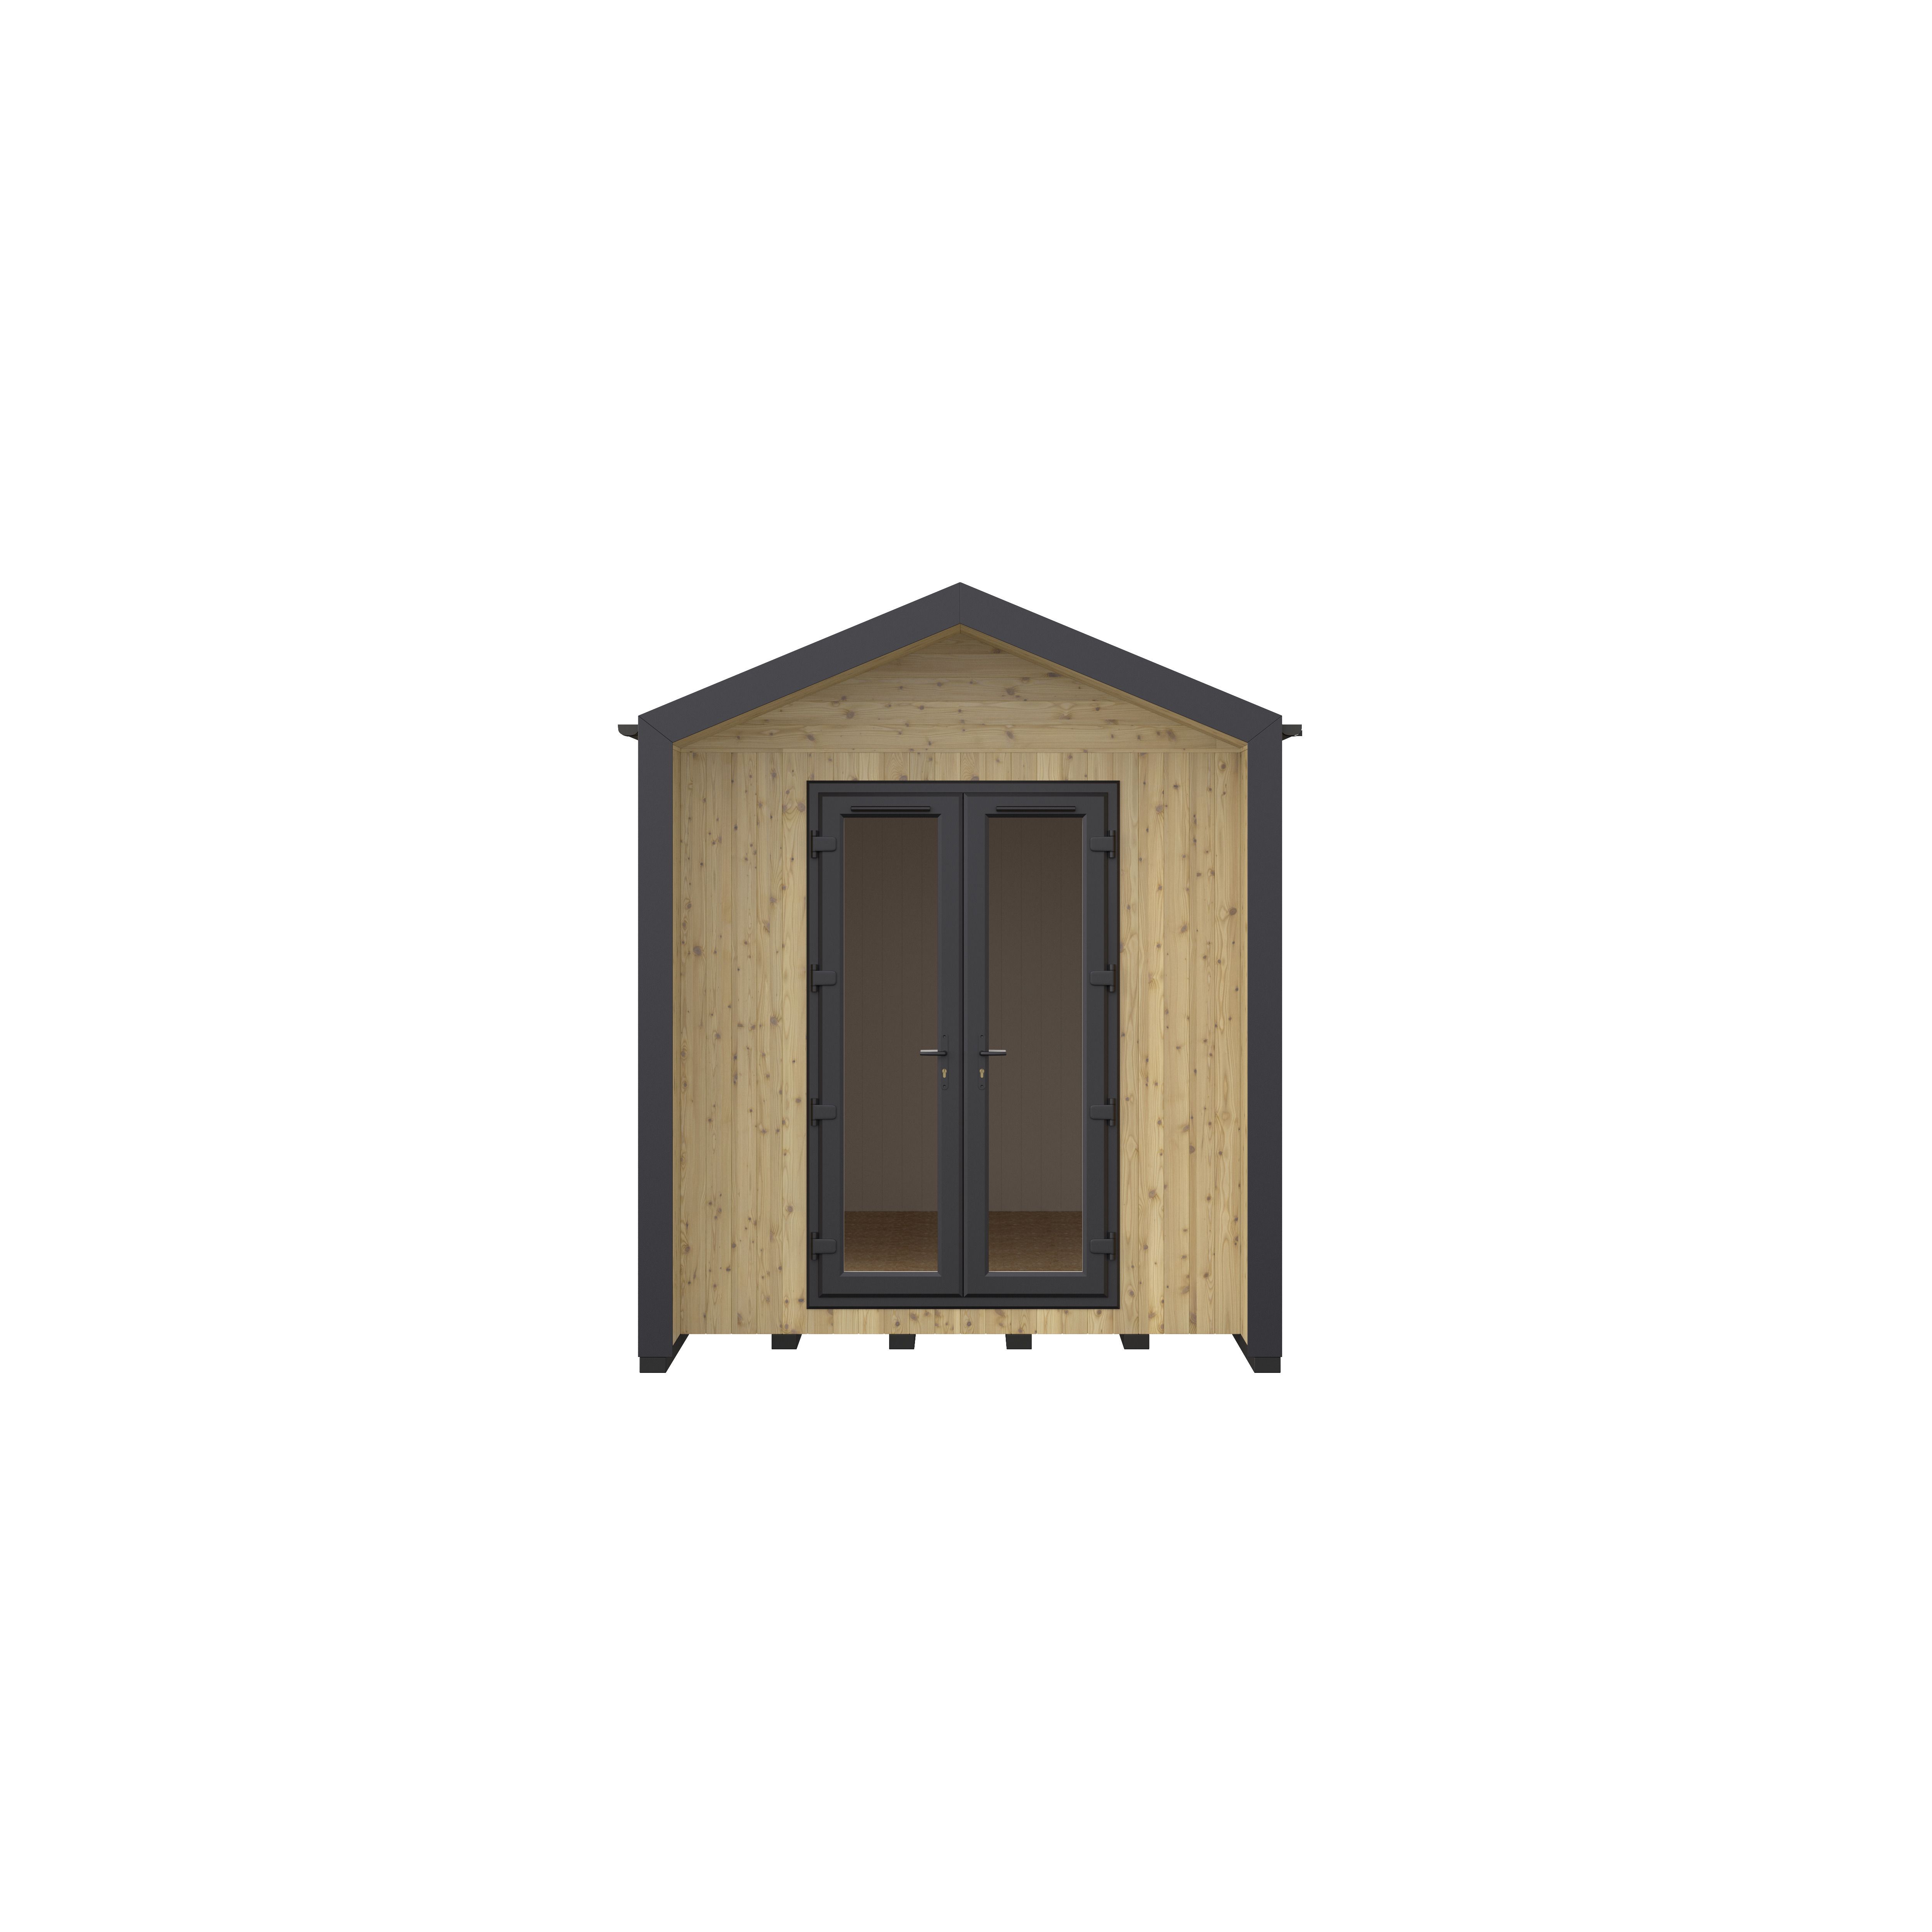 GoodHome Semora New Century 13x8 ft with Double door Pitch Garden room (Base included)